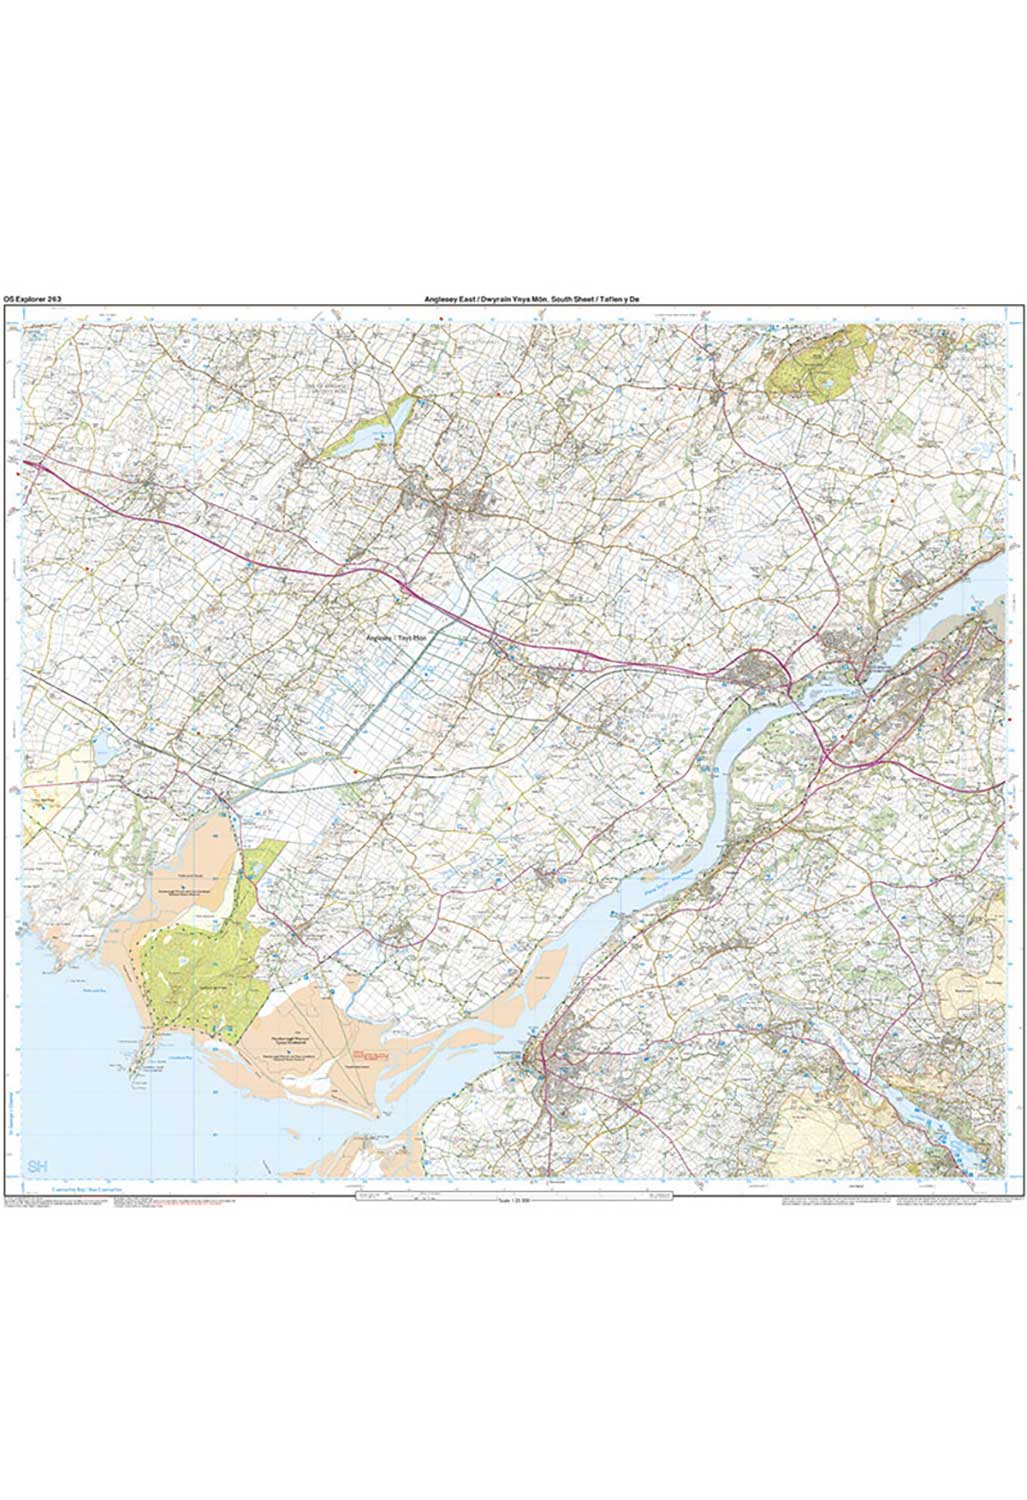 Ordnance Survey Anglesey East - OS Explorer 263 Map